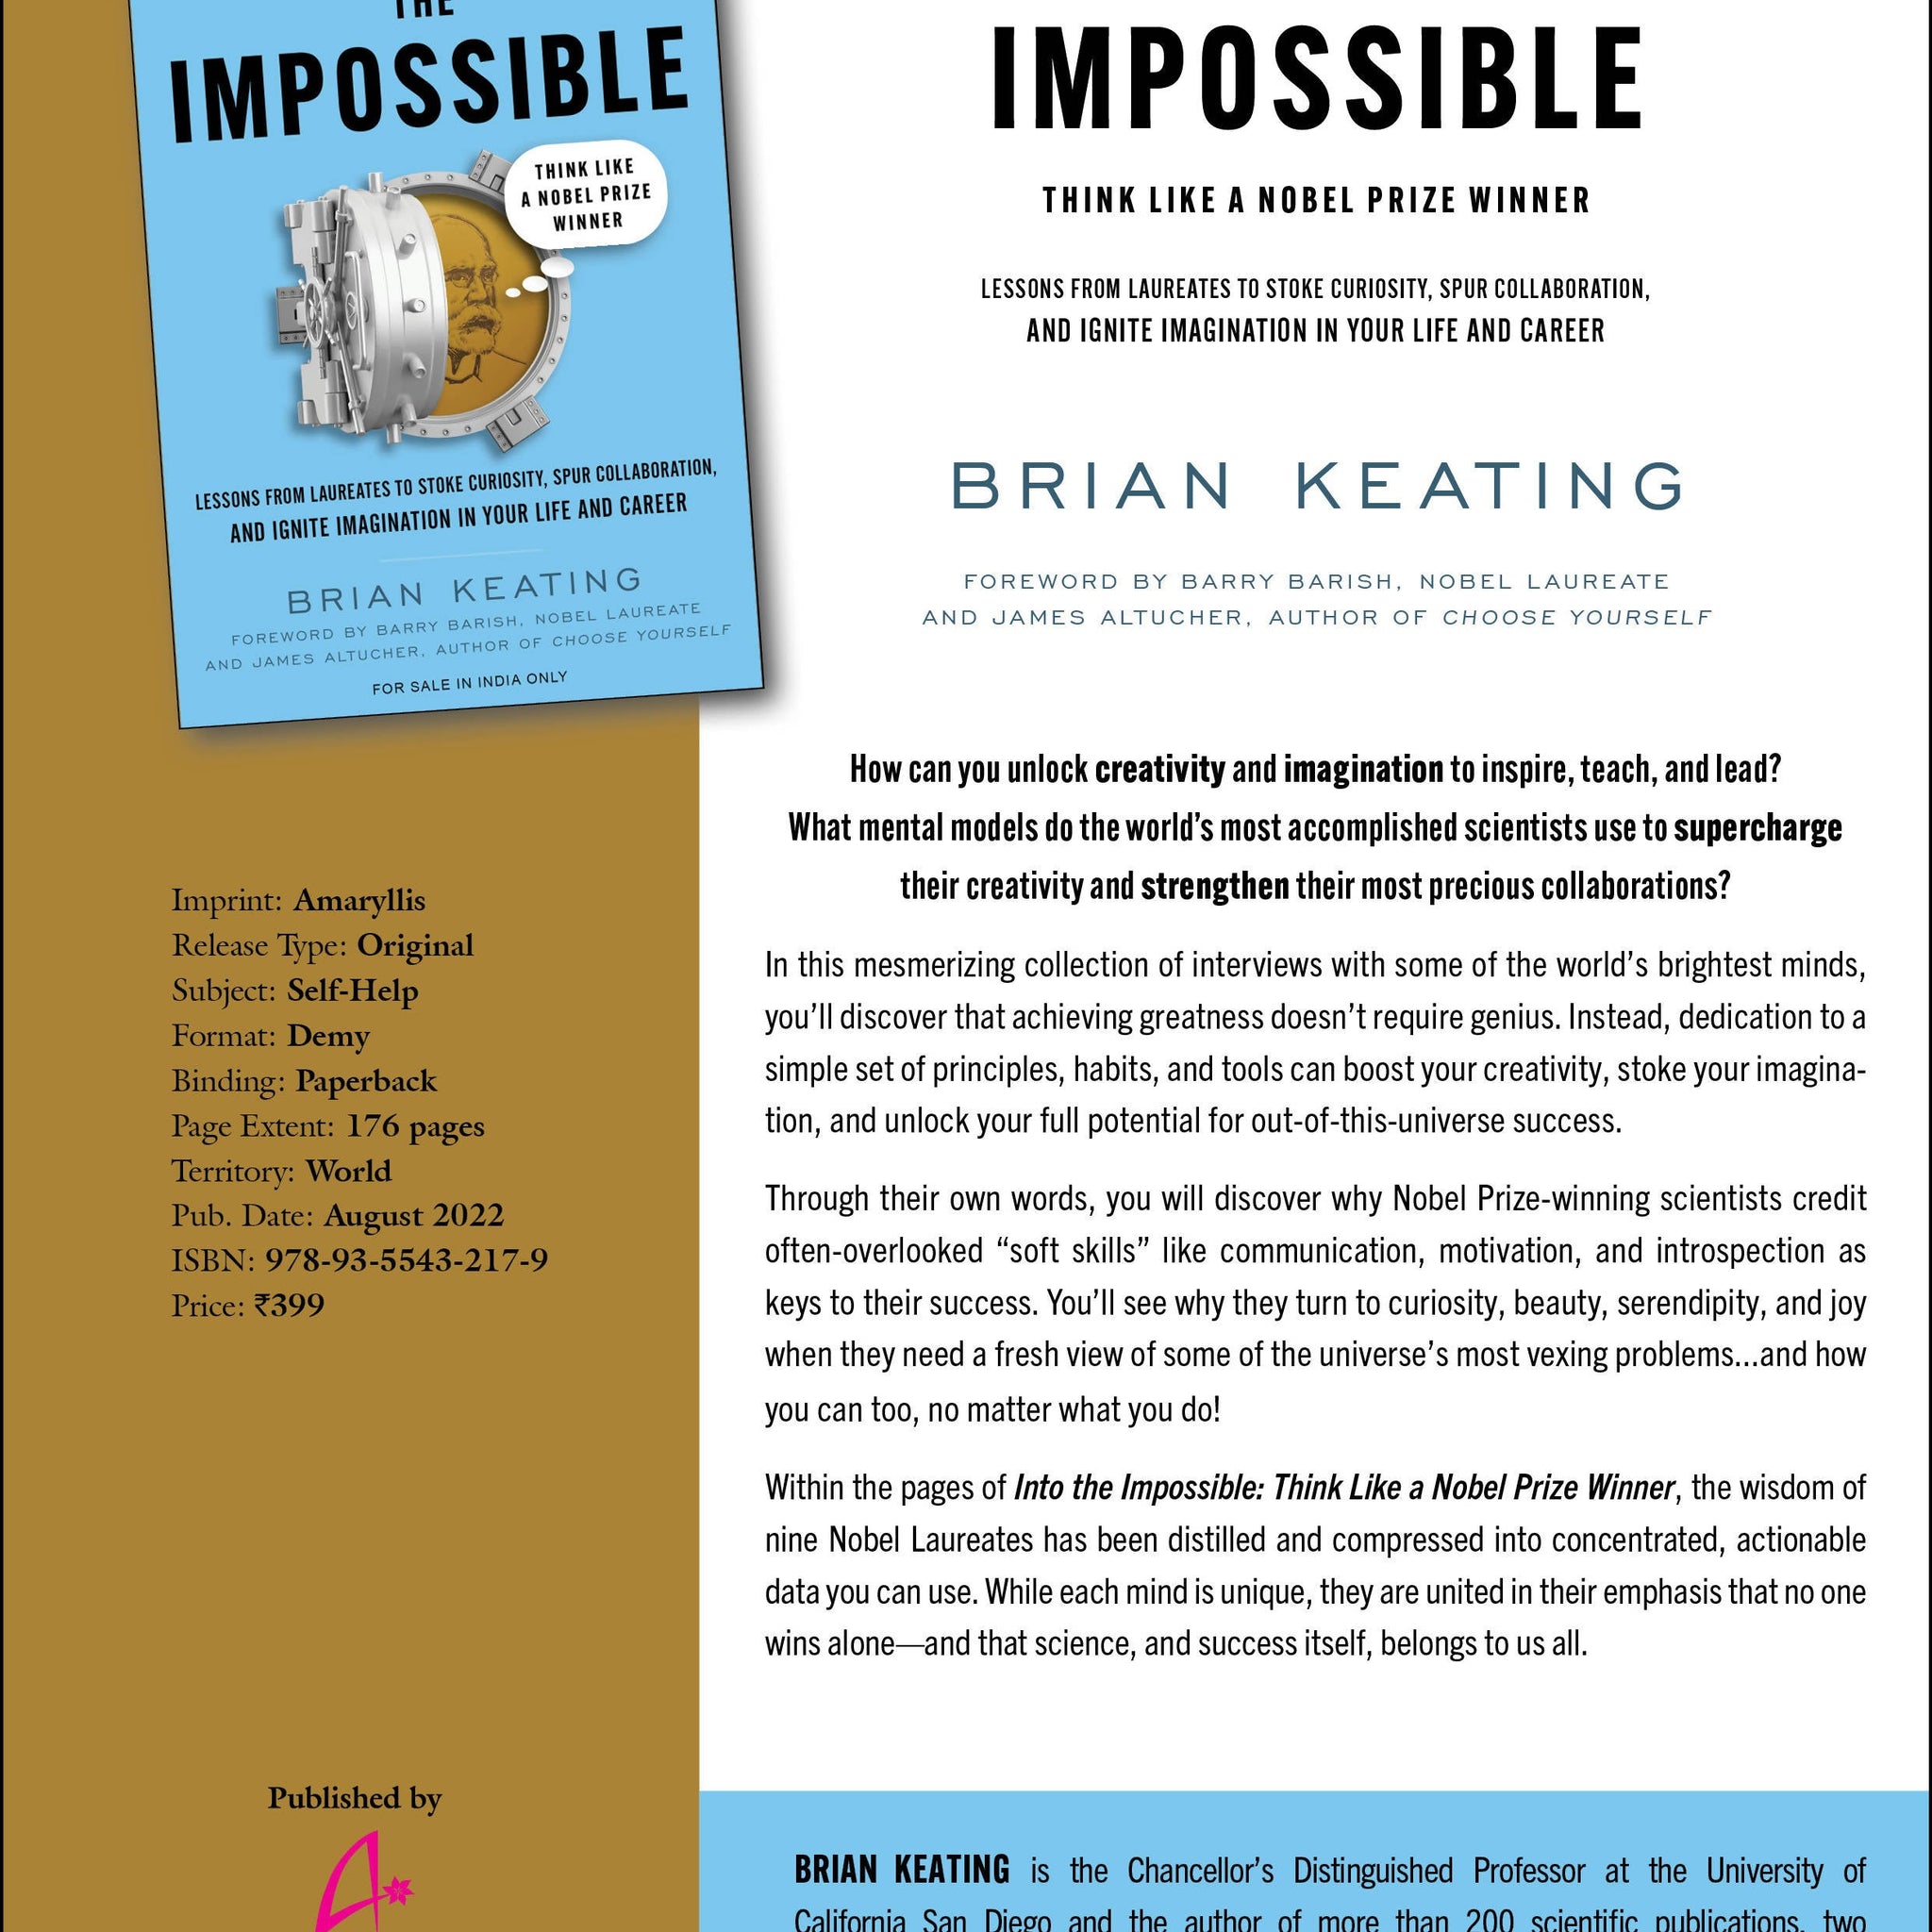 Into the Impossible: Think Like a Nobel Prize Winner: Lessons from Laureates to Stoke Curiosity, Spur Collaboration, and Ignite Imagination in Your Life and Career "